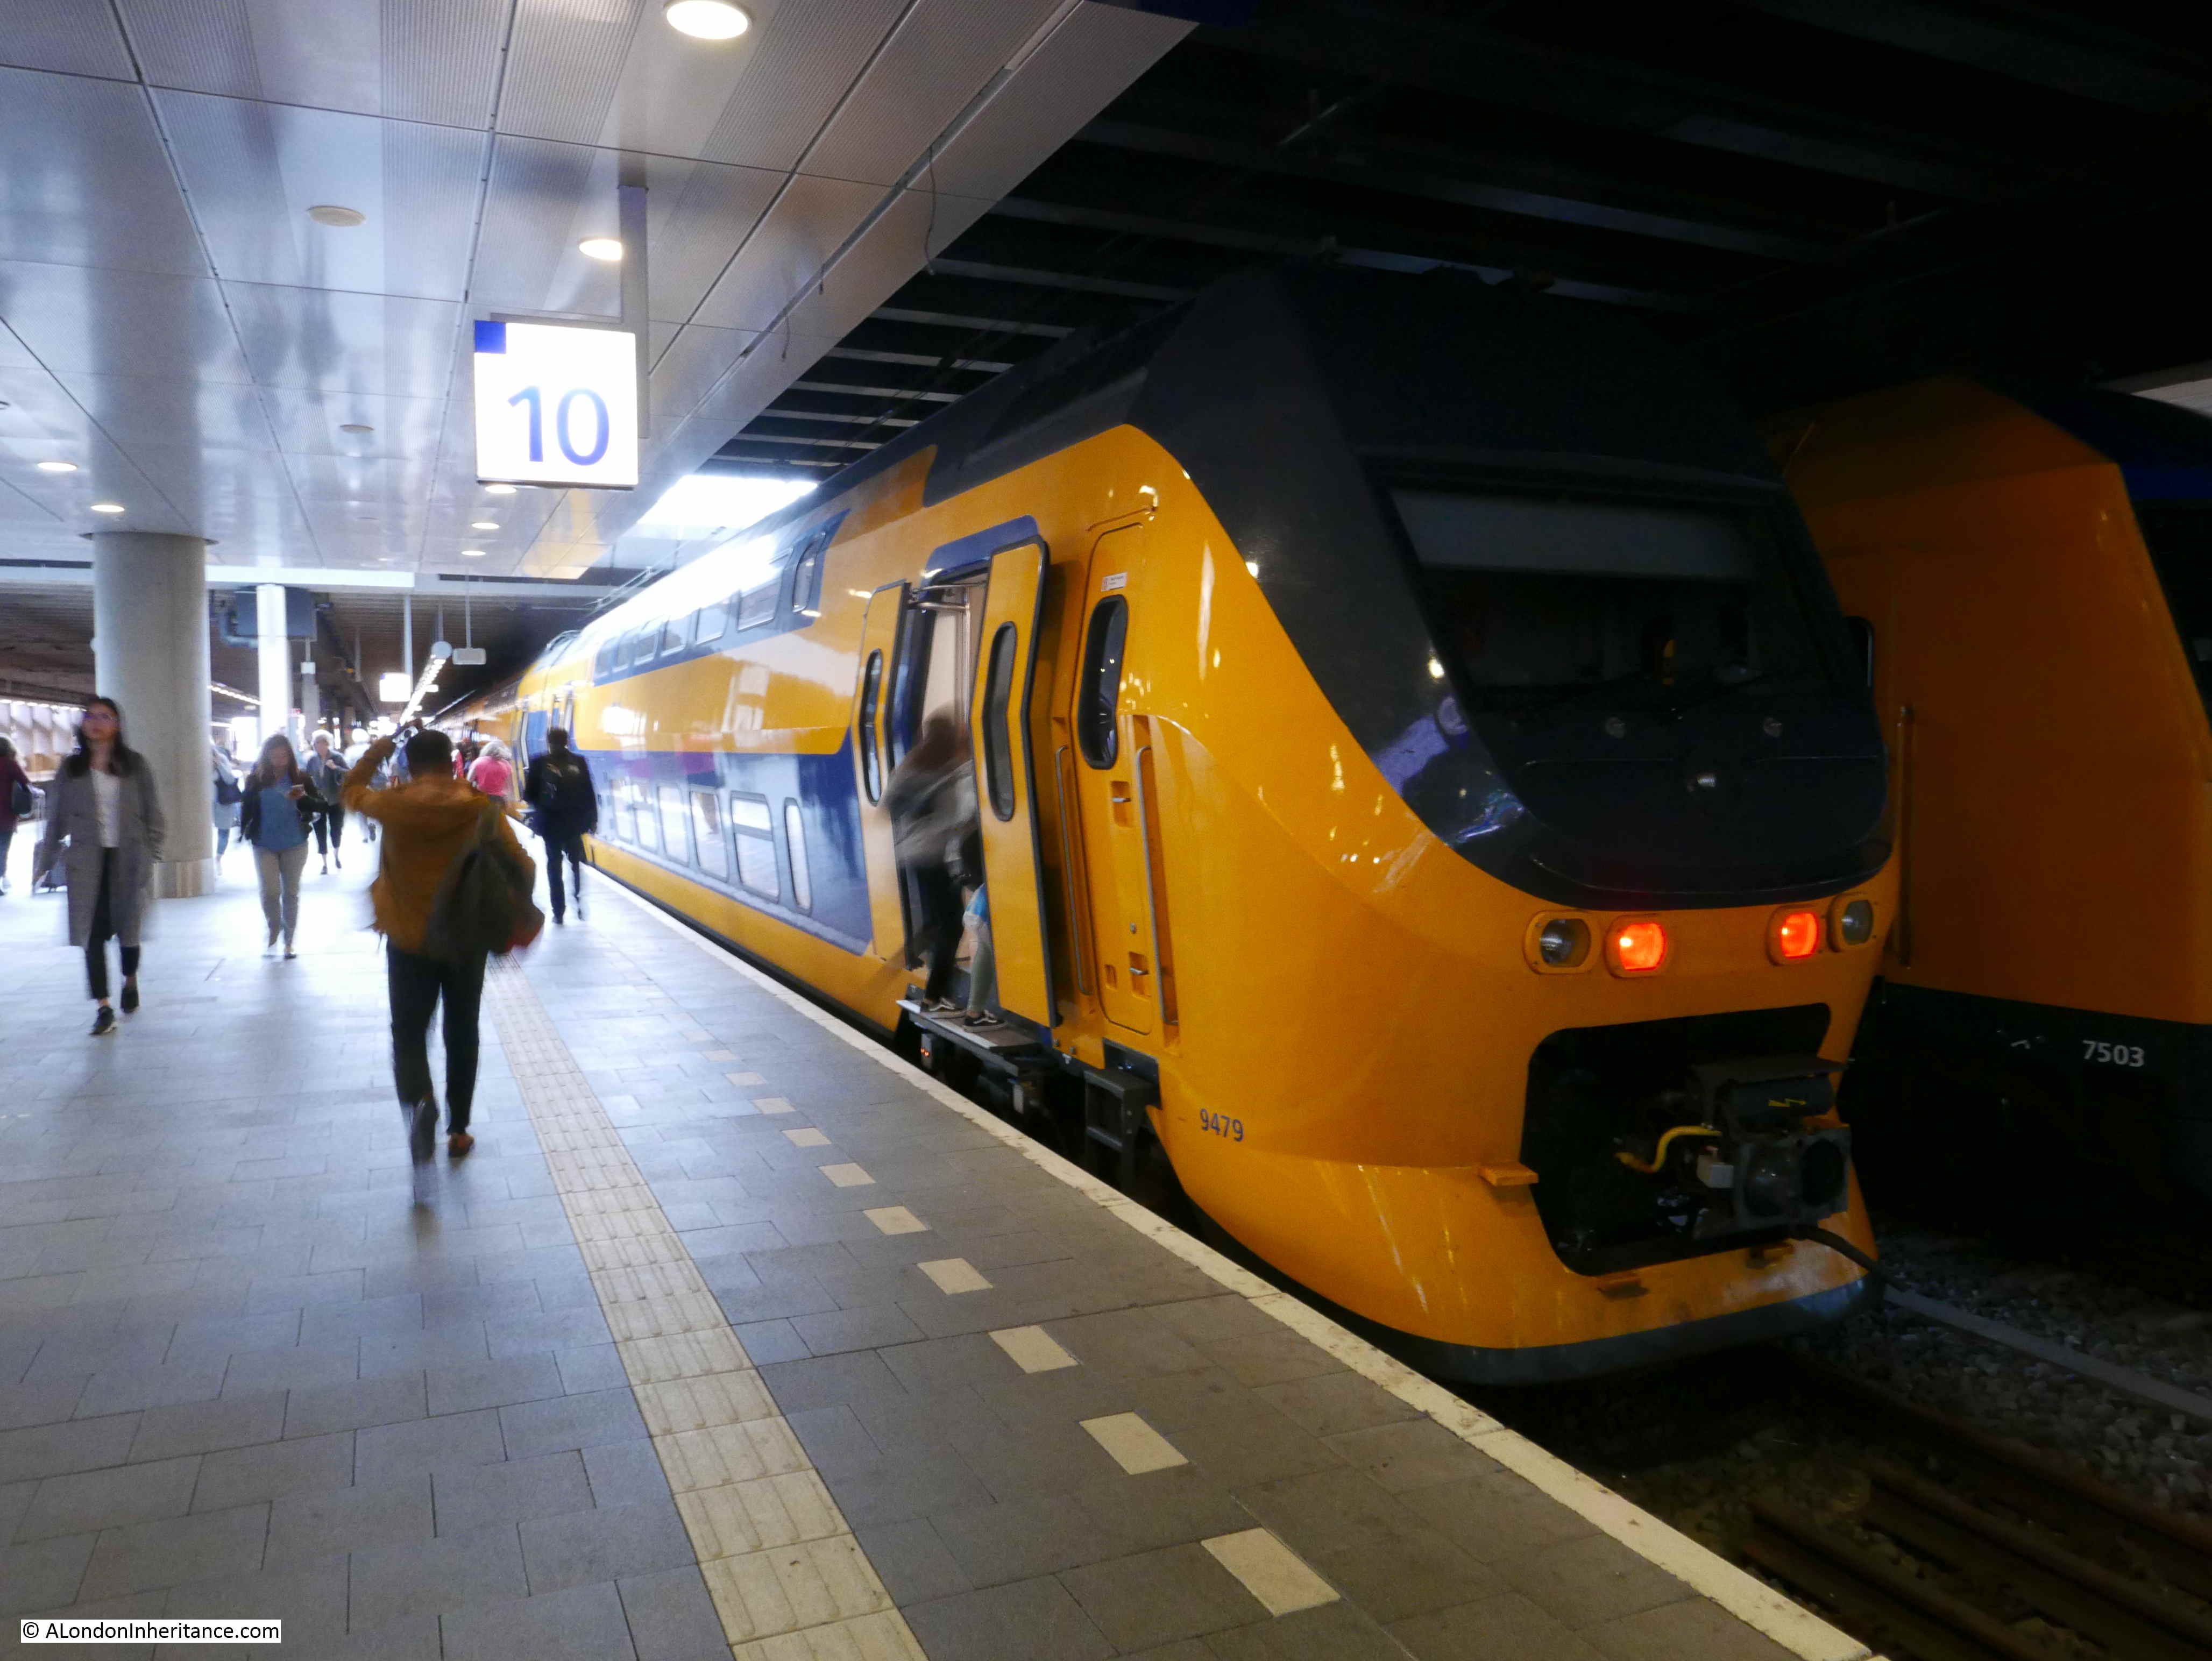 what is the train time between amsterdam city center and the airport